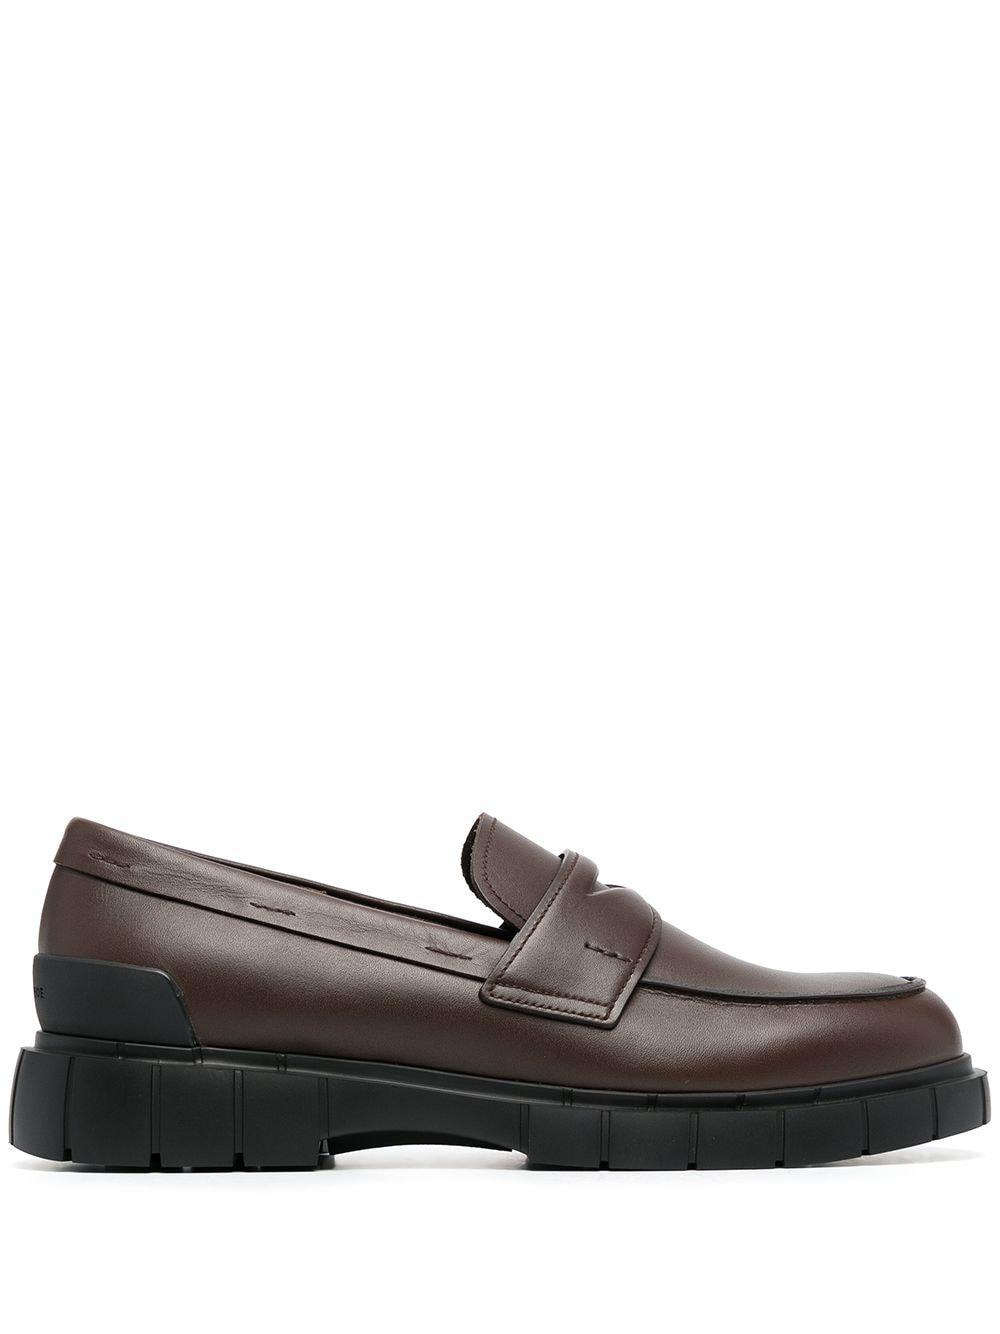 chunky sole penny loafers by CAR SHOE